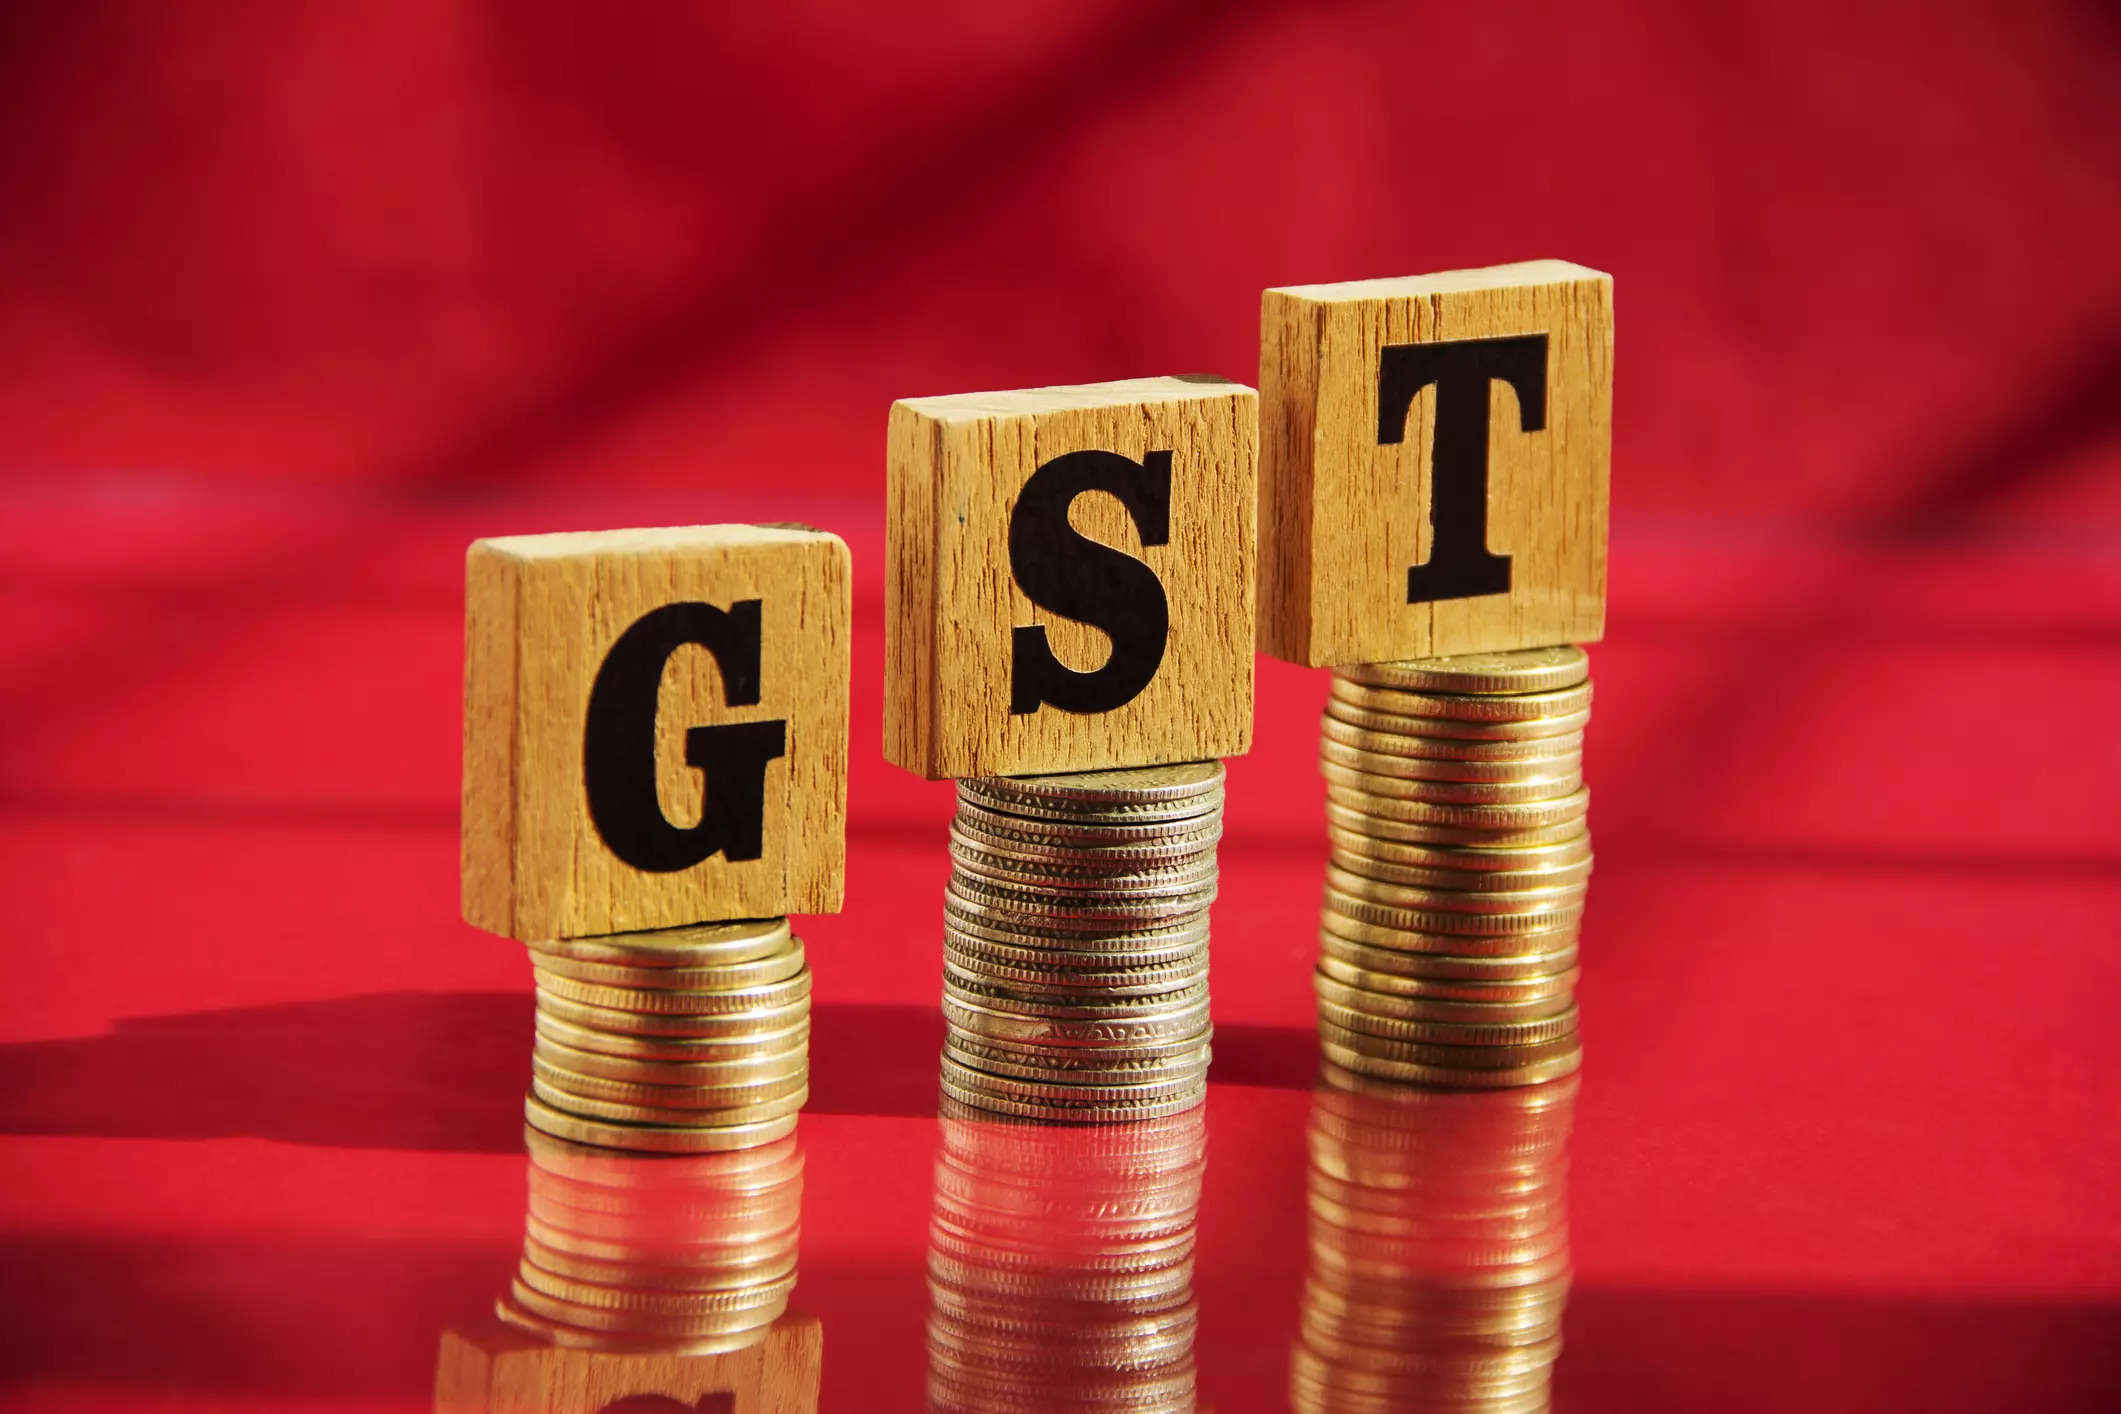  Despite benefits and flexibility offered by the coworking operators, an evident roadblock was the denial of GST registration when the ‘principal place of business’ was applied for at such shared spaces.